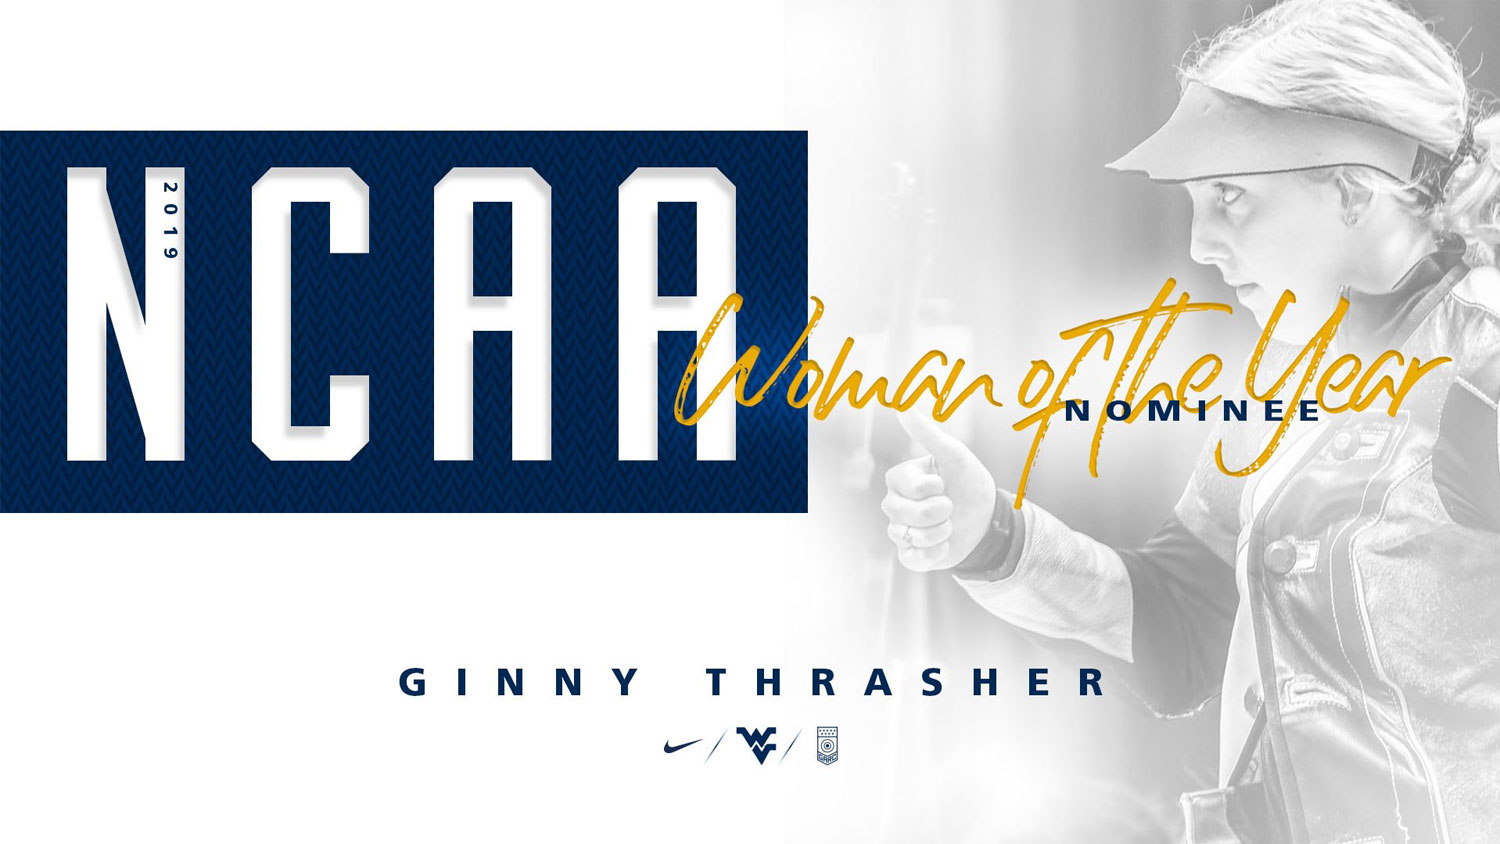 Ginny Thrasher nominated for 2019 NCAA Woman of the Year